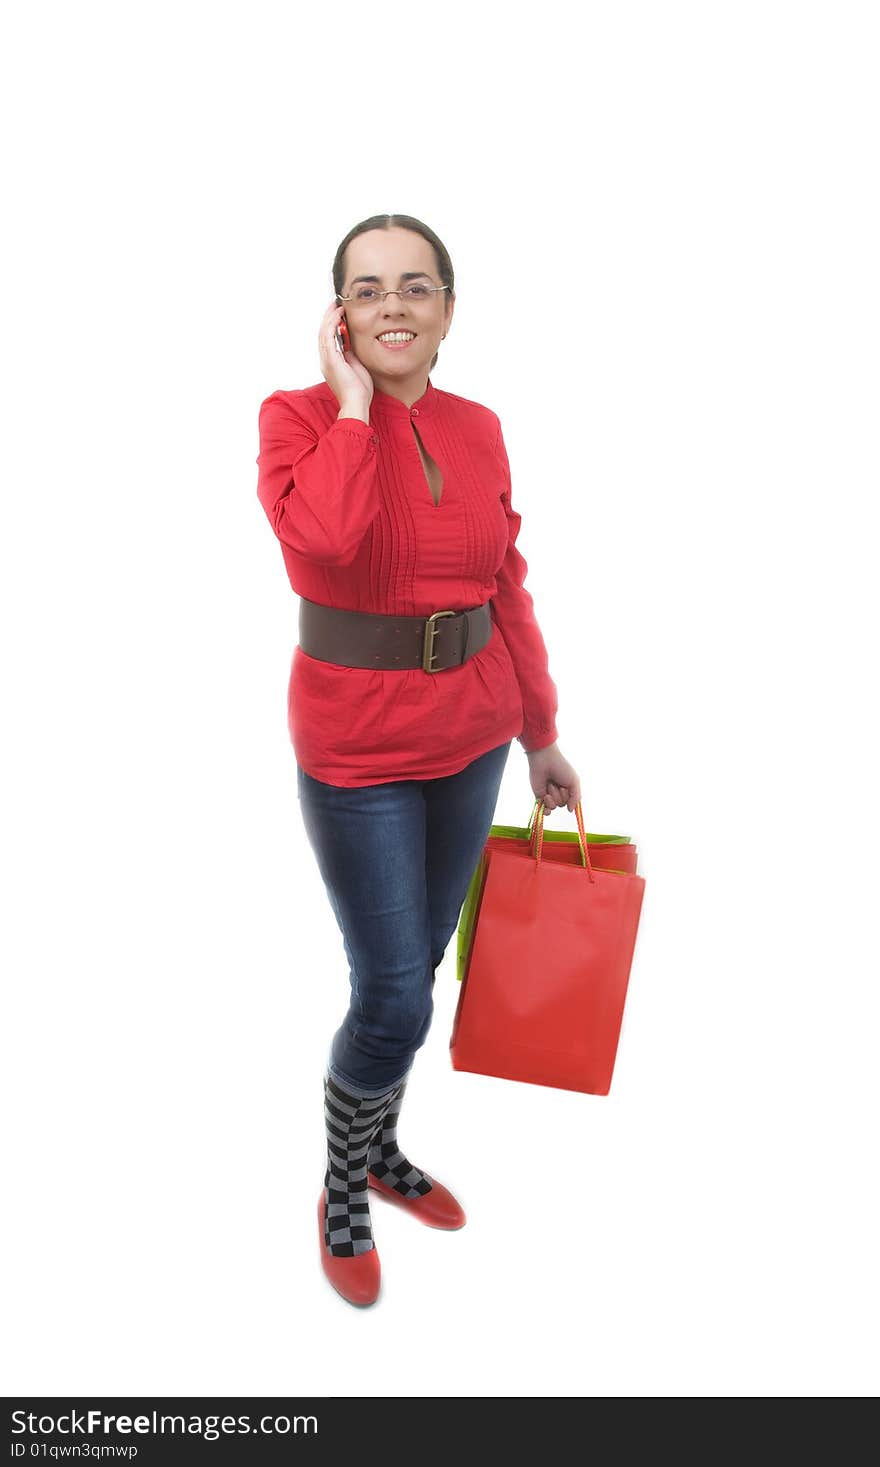 Lady in red with red shopping bag talking by phone. Lady in red with red shopping bag talking by phone